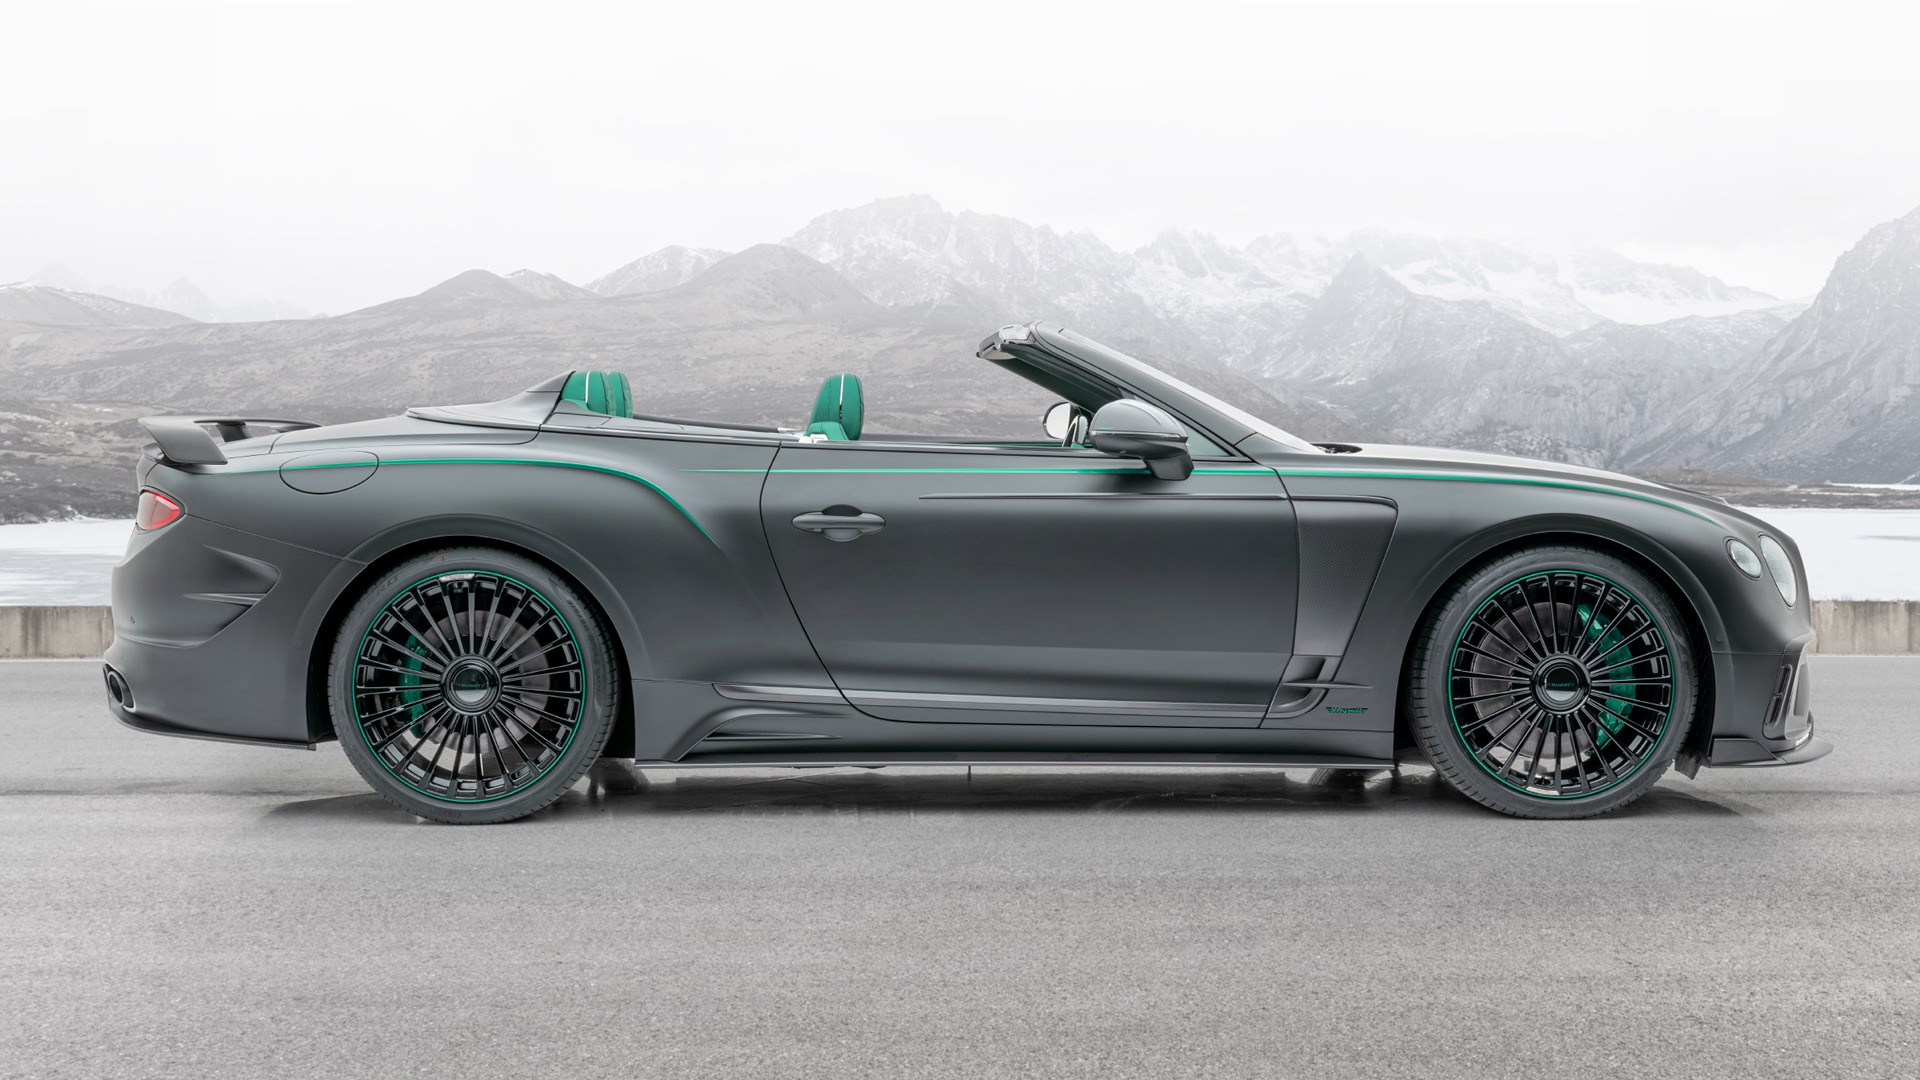 Bentley Continental Gt V8 Convertible By Mansory Car Convertible Grand Tourer Luxury Car Silver Car  1920x1080